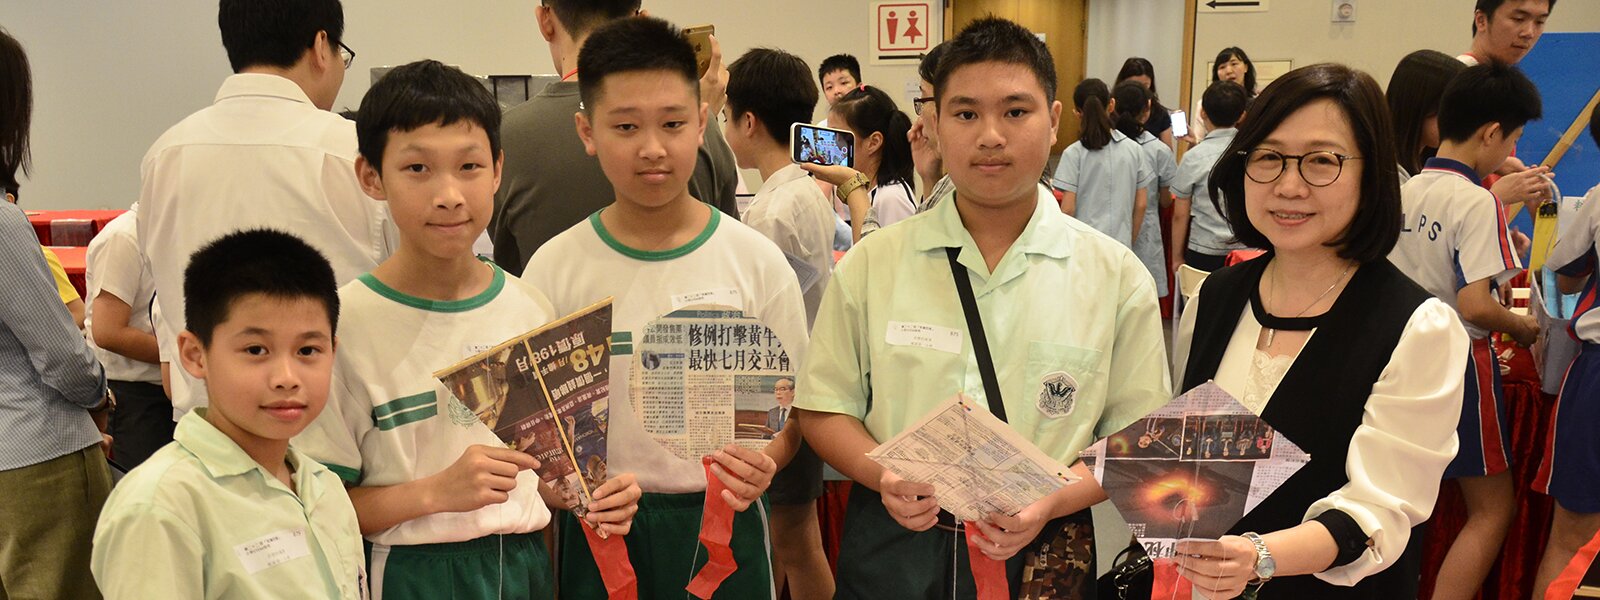 22nd Primary STEM Project Exhibition ‘Smart Toys’